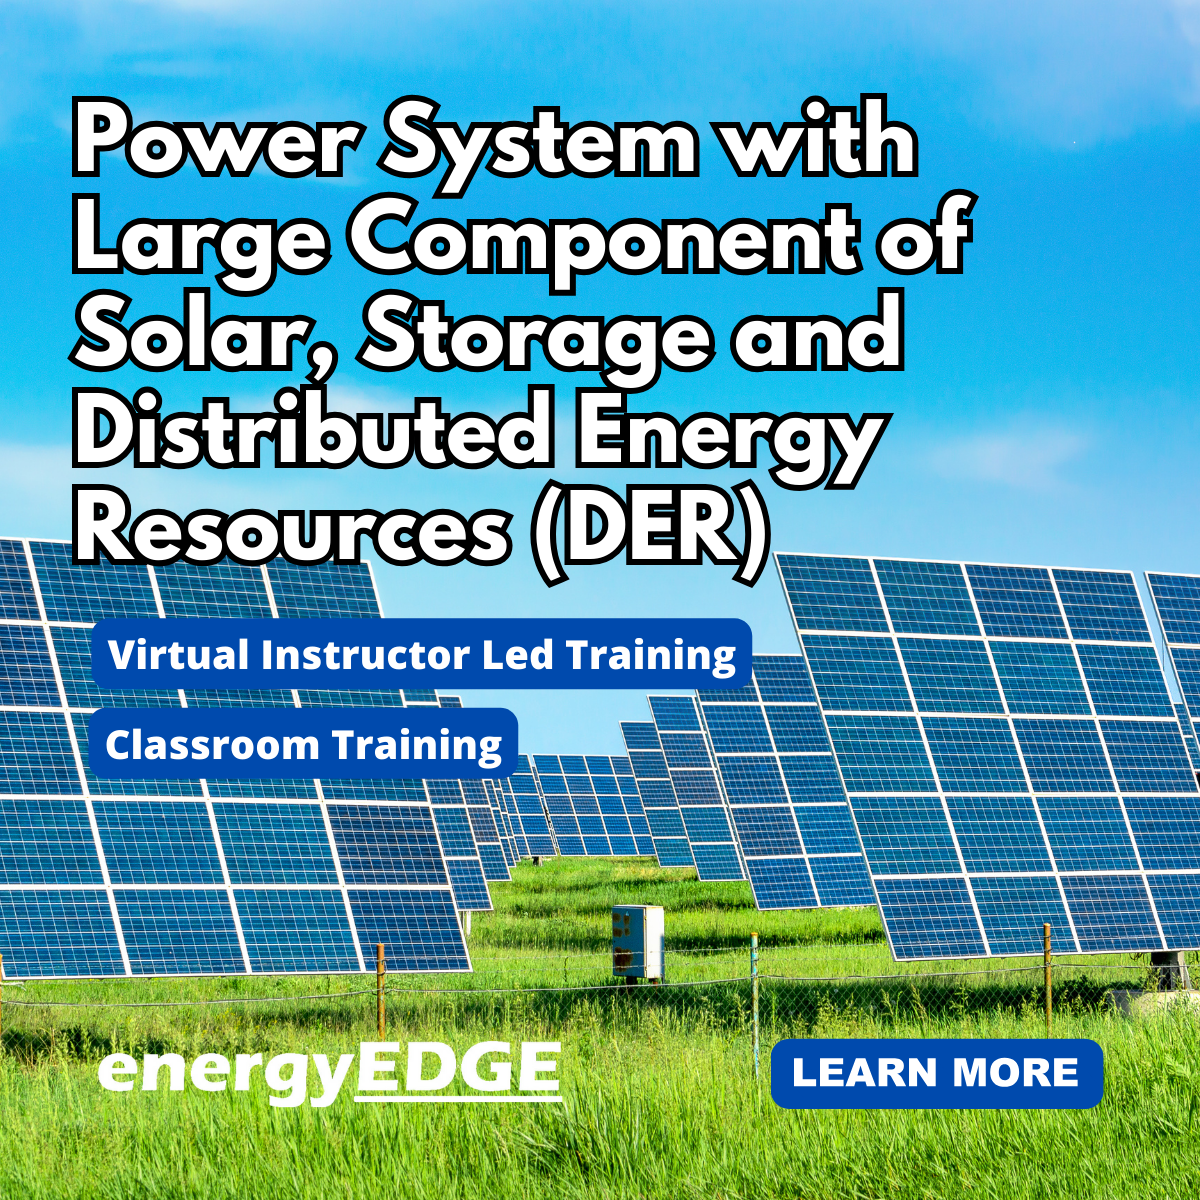 Power System with Large Component of Solar, Storage and Distributed Energy Resources (DER)